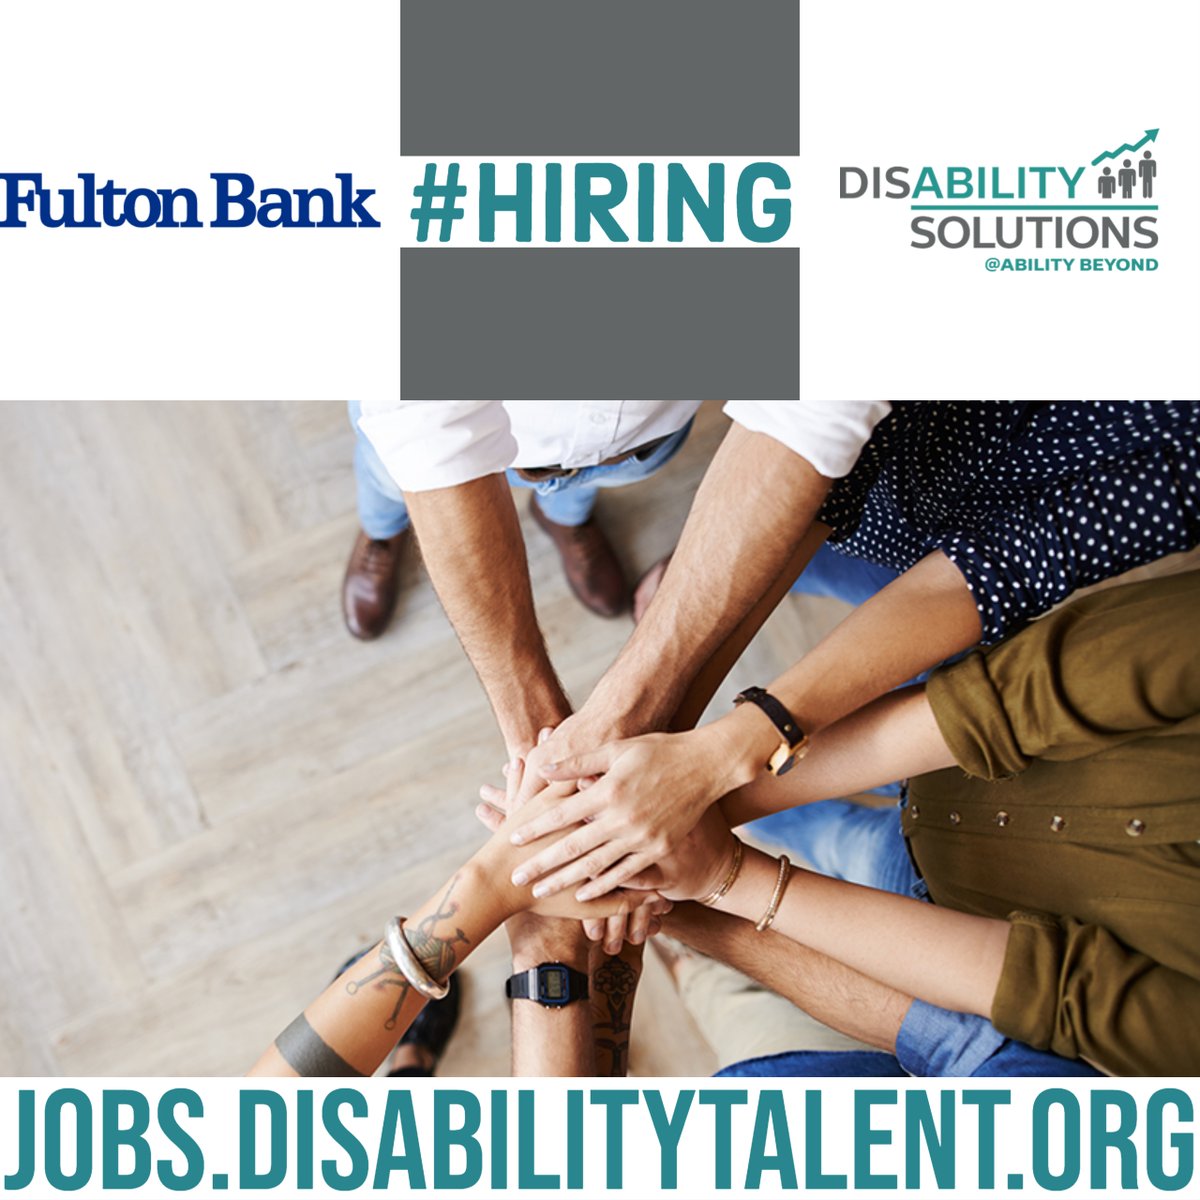 @FultonBank is hiring! Opportunities here:
hubs.la/Q01V2Wck0

Sign up for a free account and have alerts sent to you notifying of new jobs in your area here:hubs.la/Q01V2-Nm0

#Hiring #Disability #DisabilityEmployment #EmploymentOpportunities